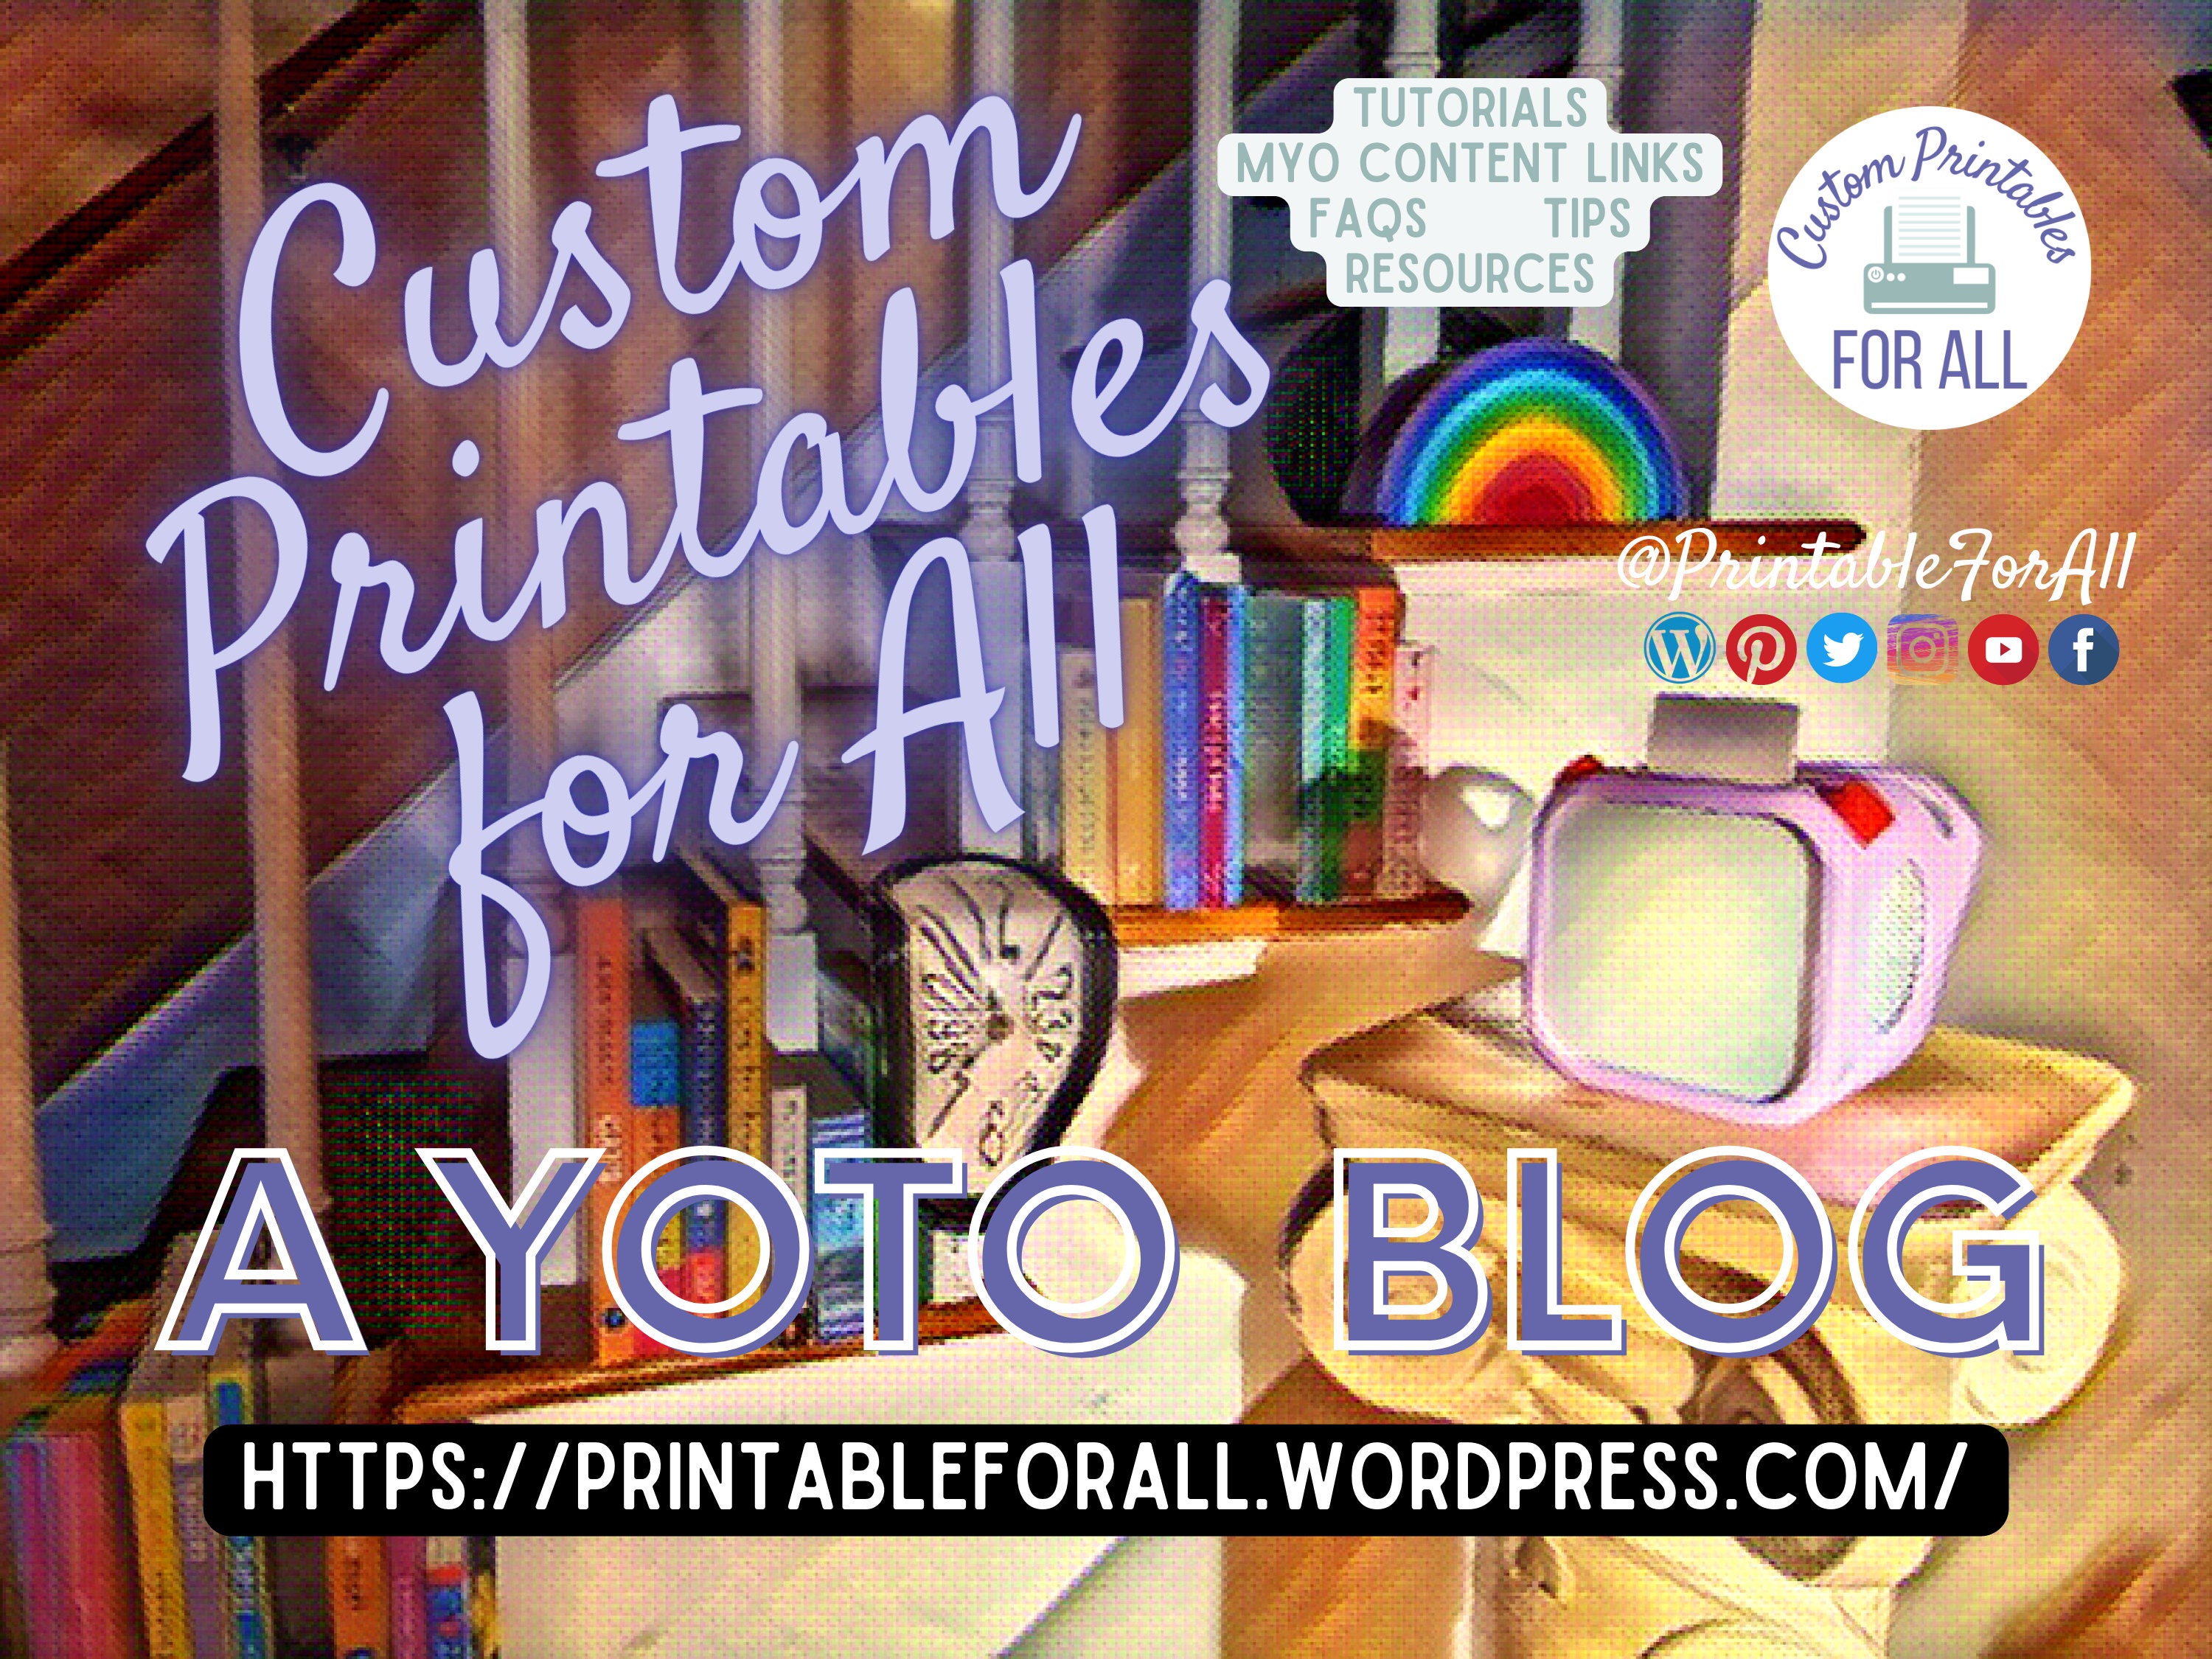 All About Labeling MYO Yoto Cards - Vinyl Labels, Sticker Printers, and  More - Snap Happy Mom